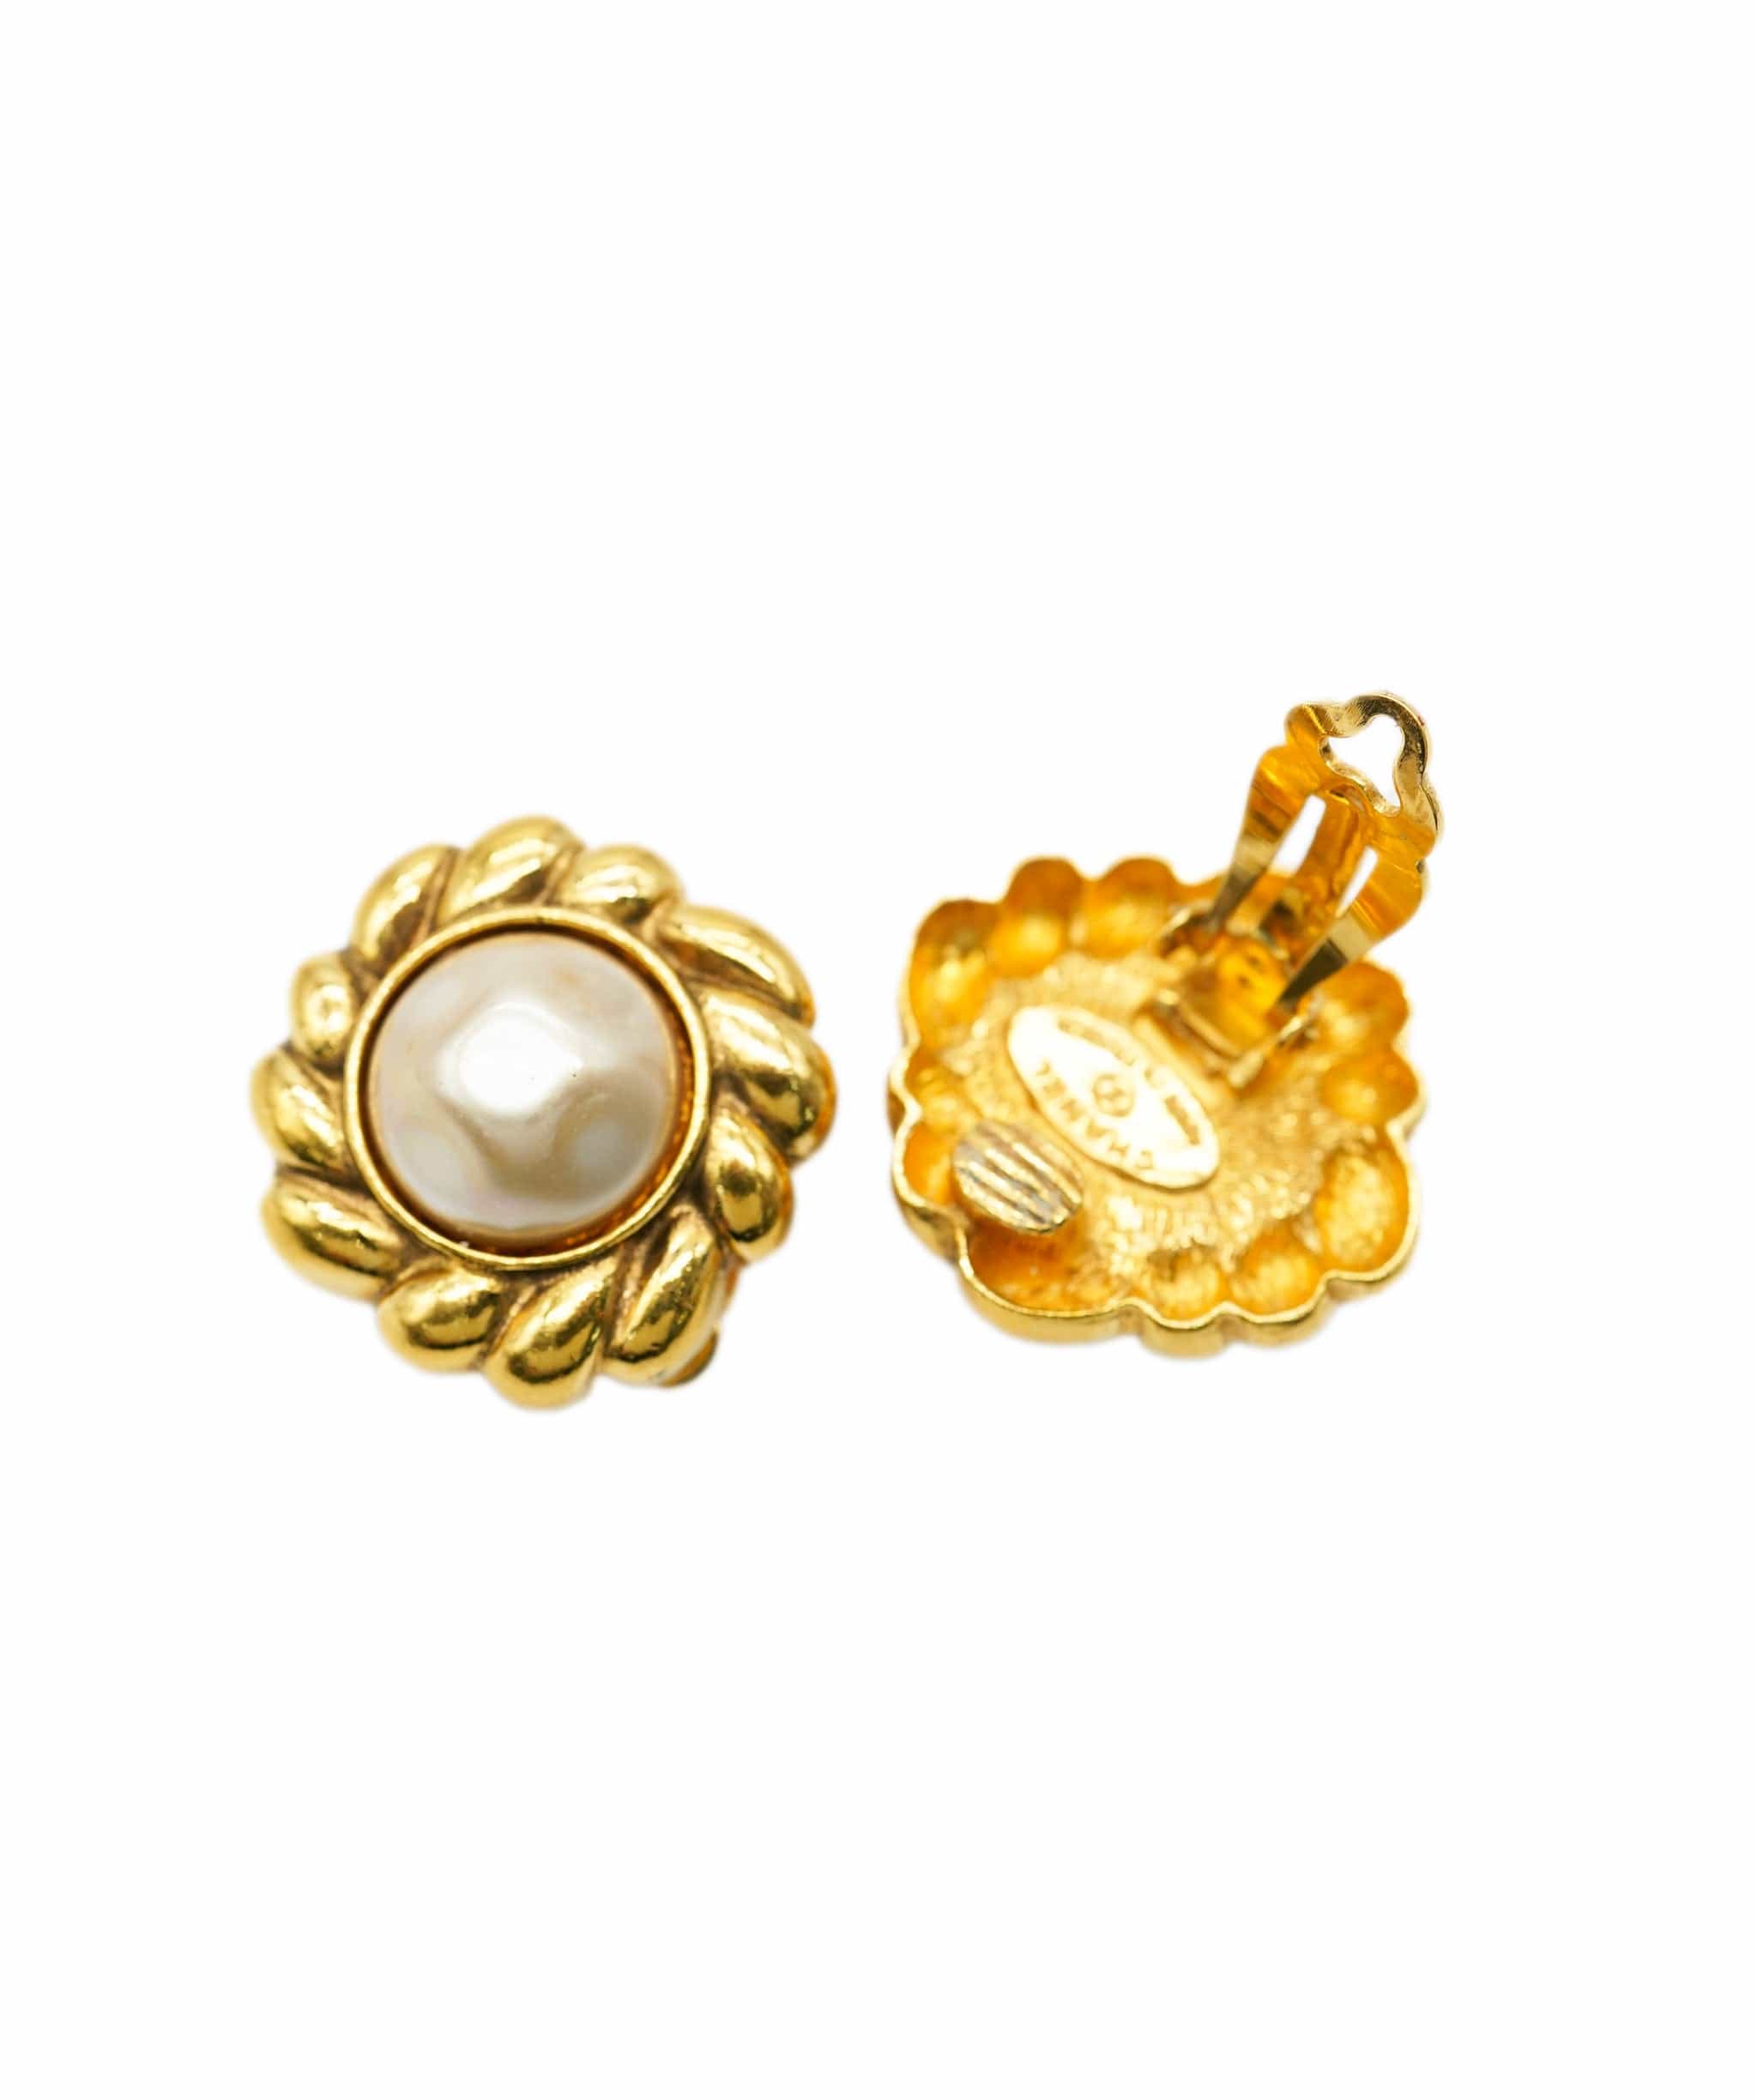 Chanel Chanel 96A Crowned CC Studs 65409 ASL3892